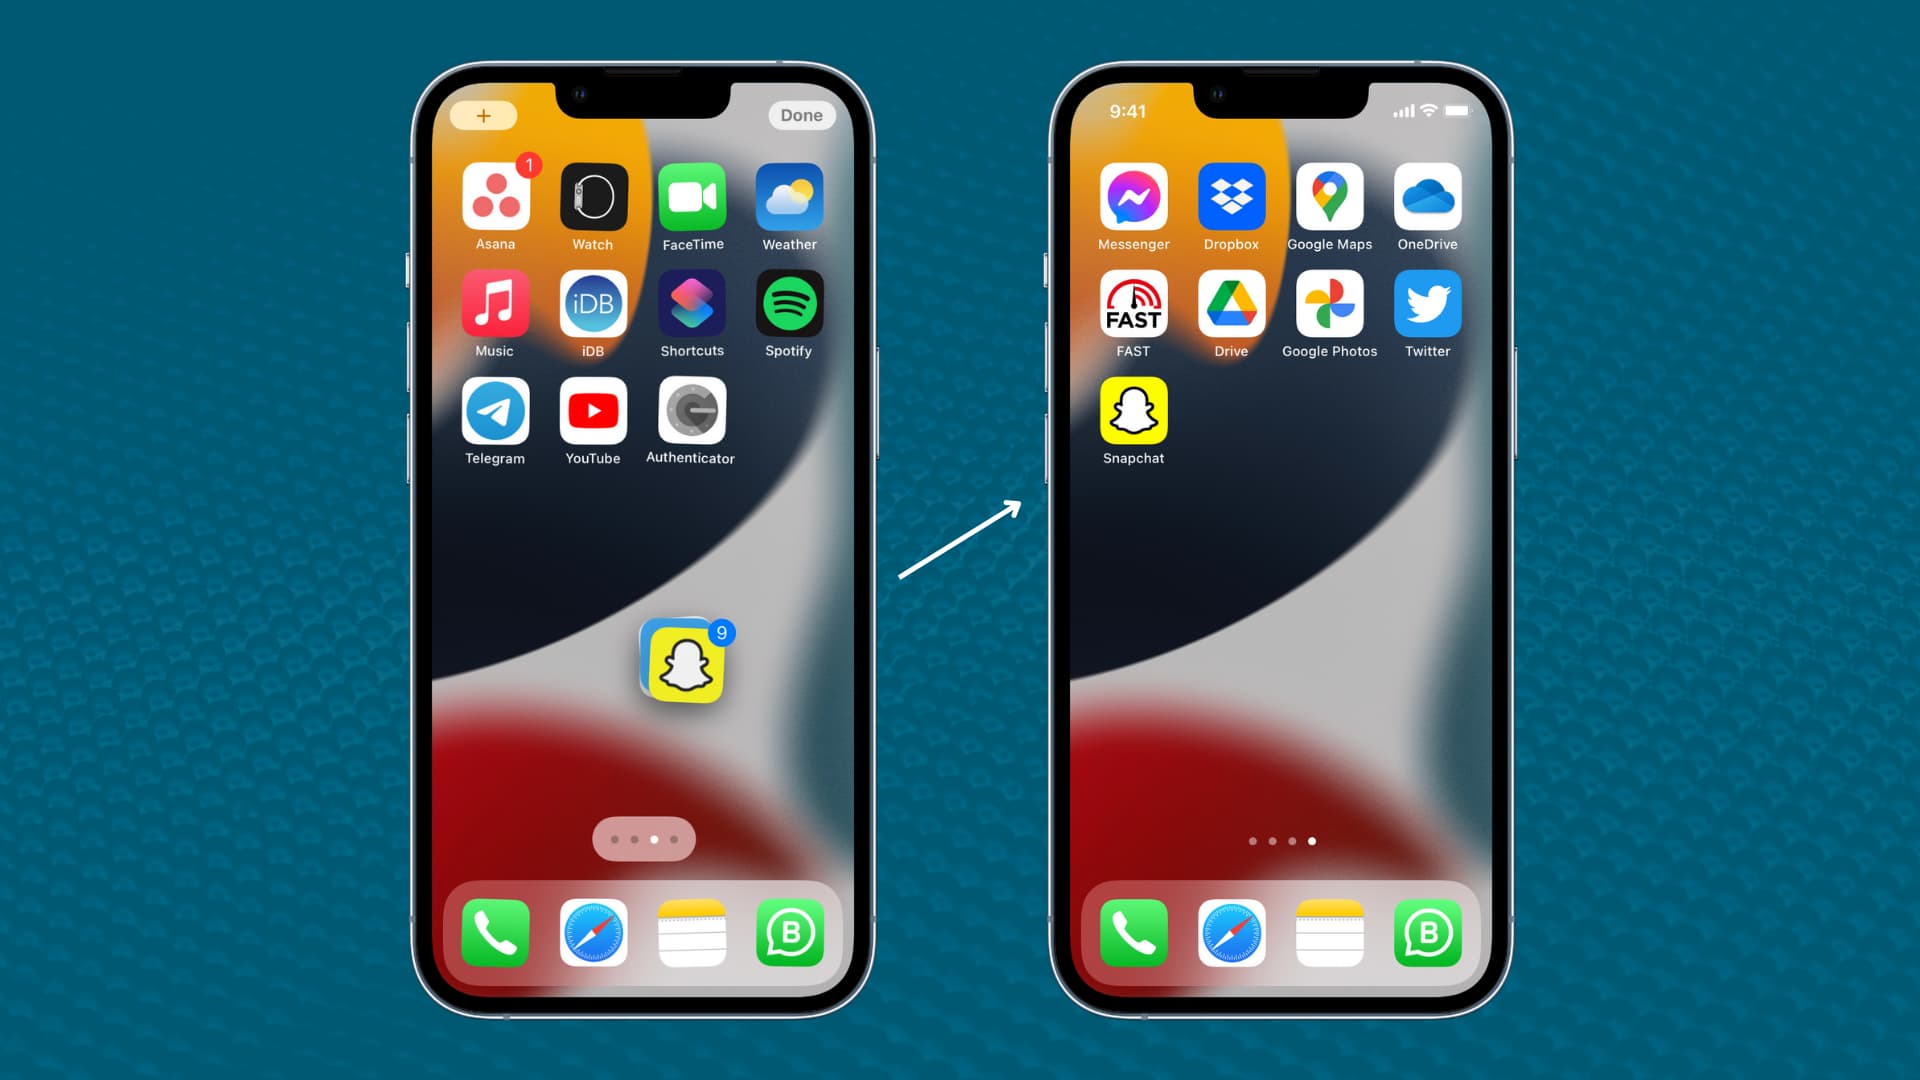 app-icon-movement-rearranging-app-icons-on-iphone-10